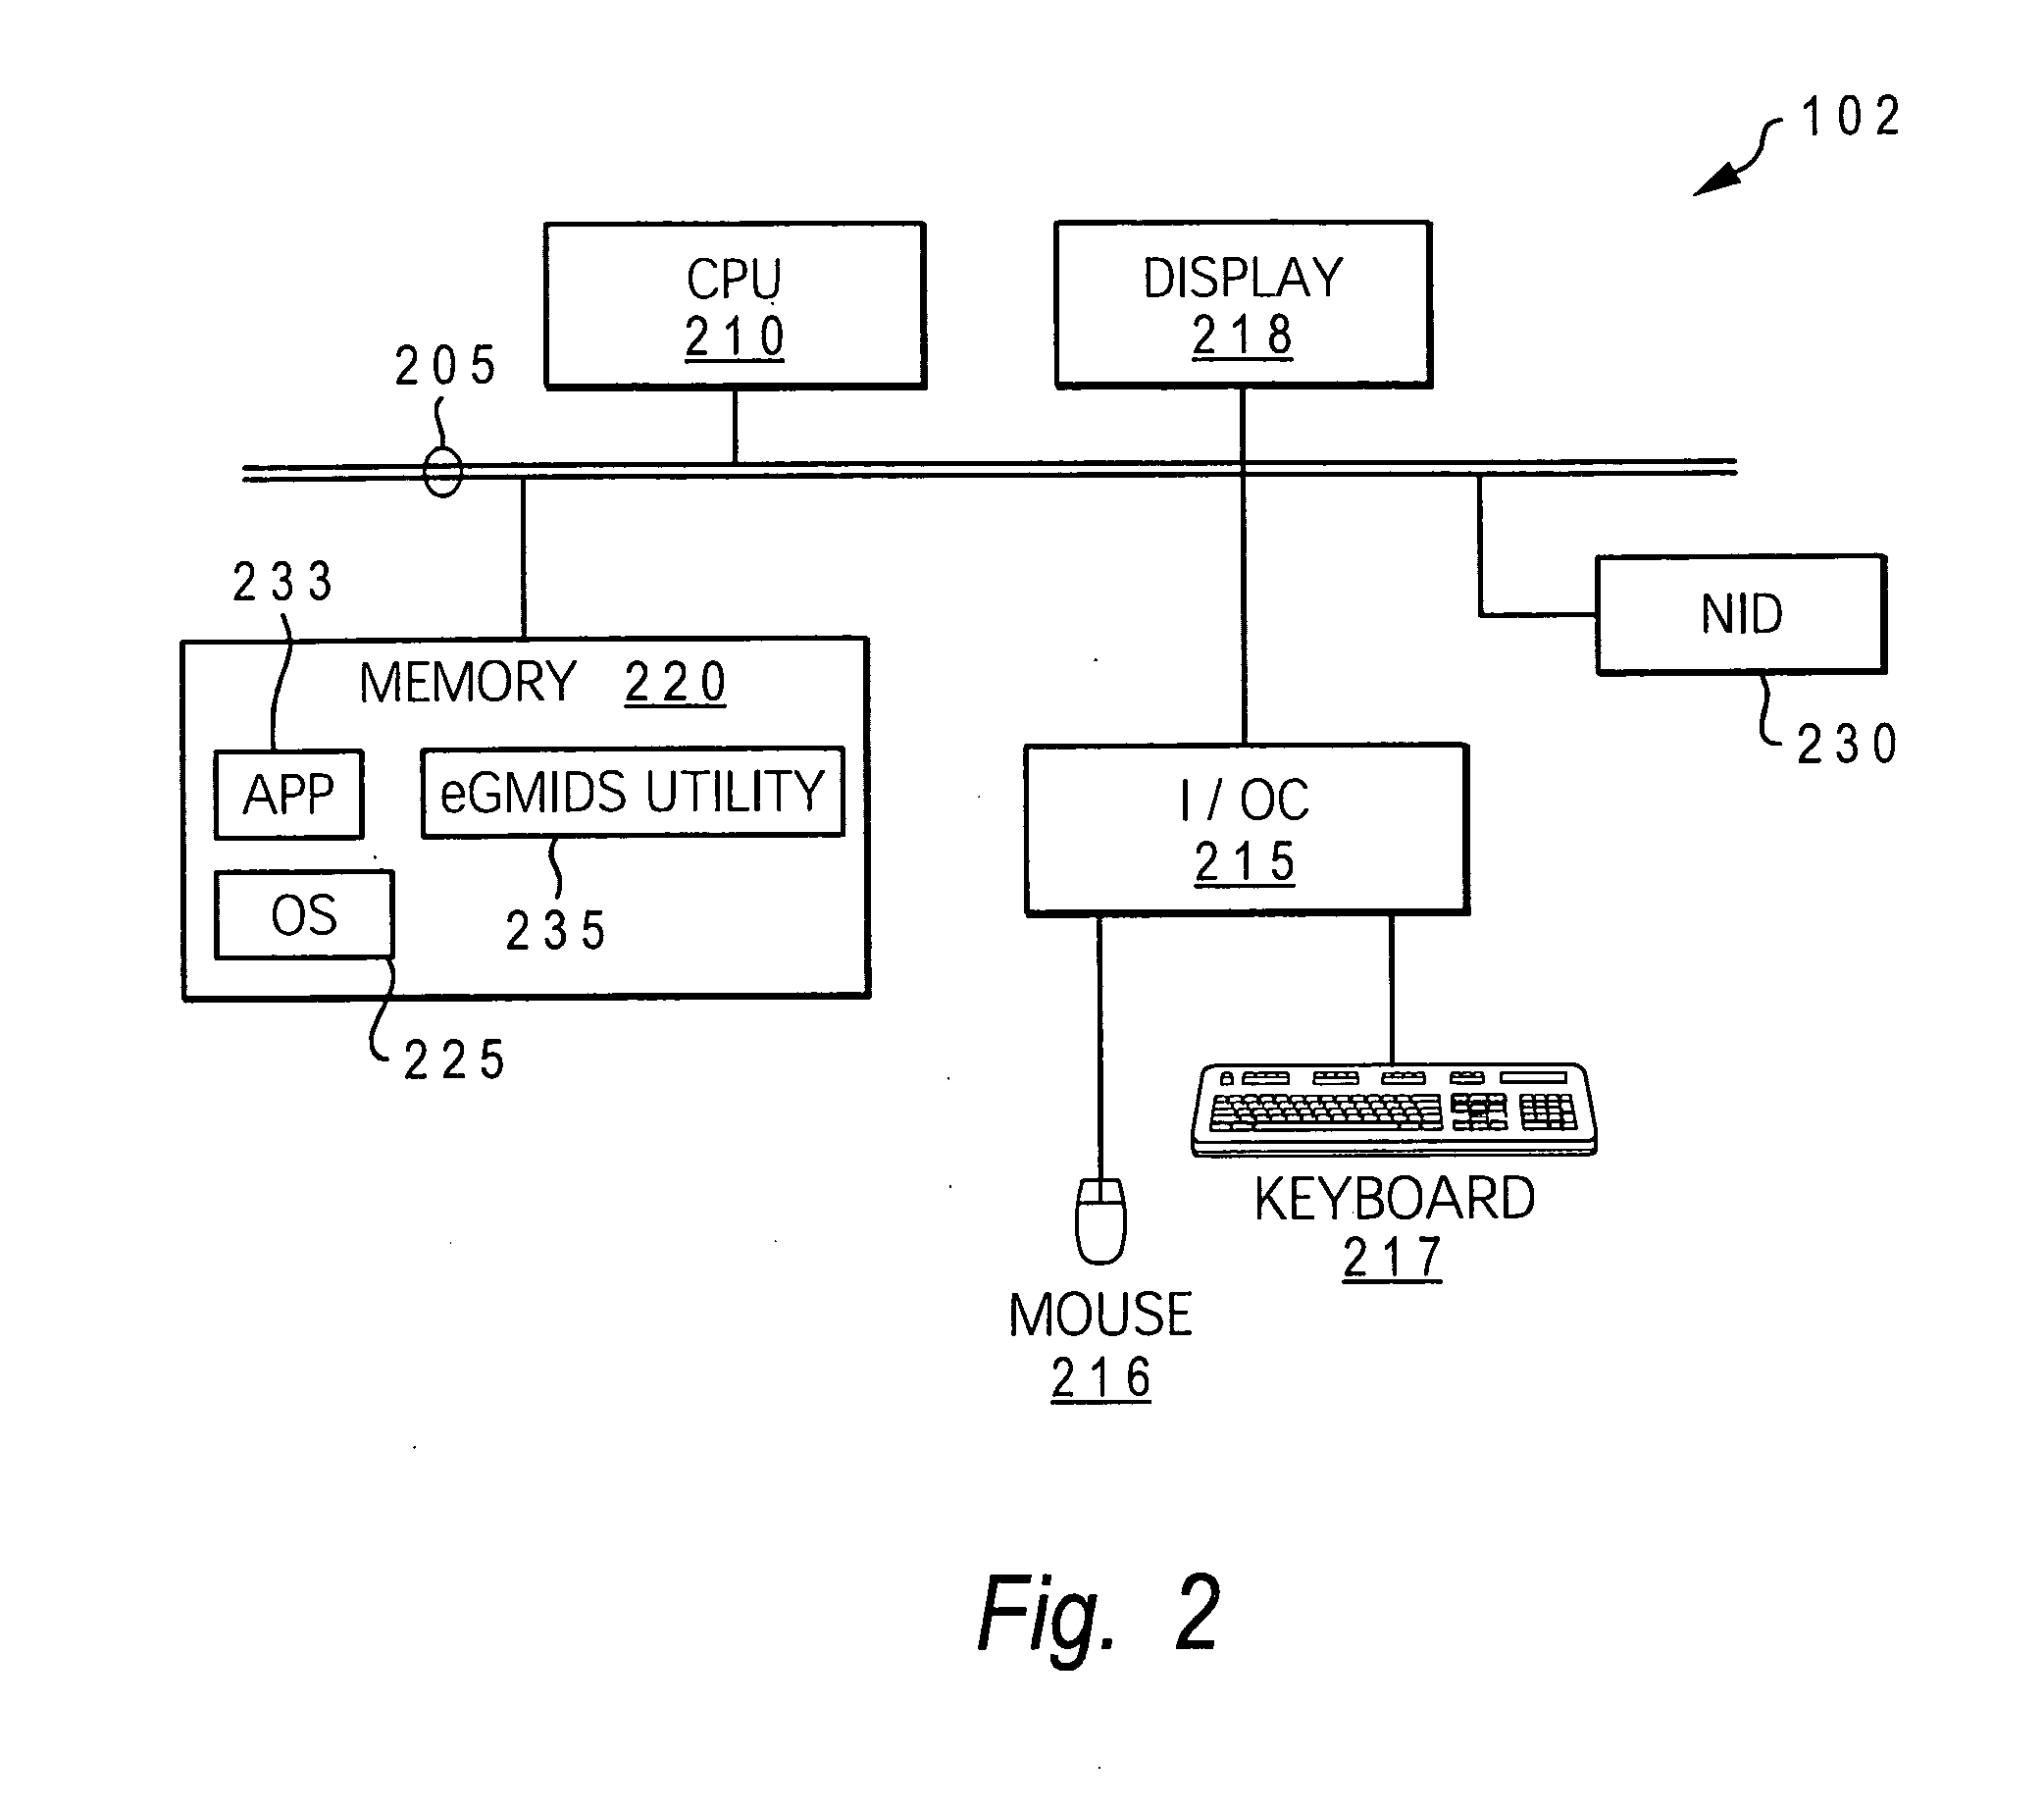 Enabling network intrusion detection by representing network activity in graphical form utilizing distributed data sensors to detect and transmit activity data